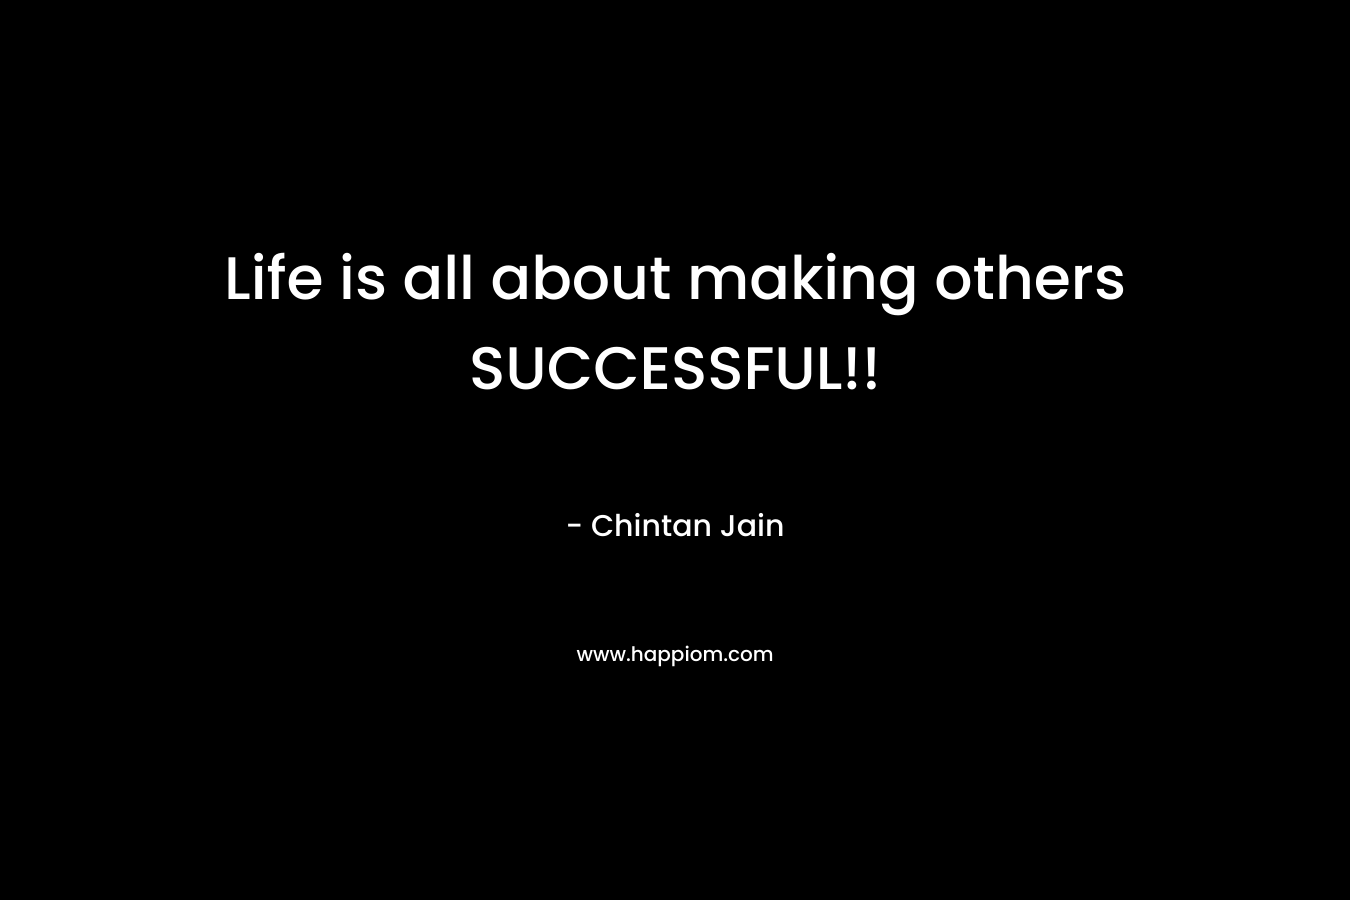 Life is all about making others SUCCESSFUL!!